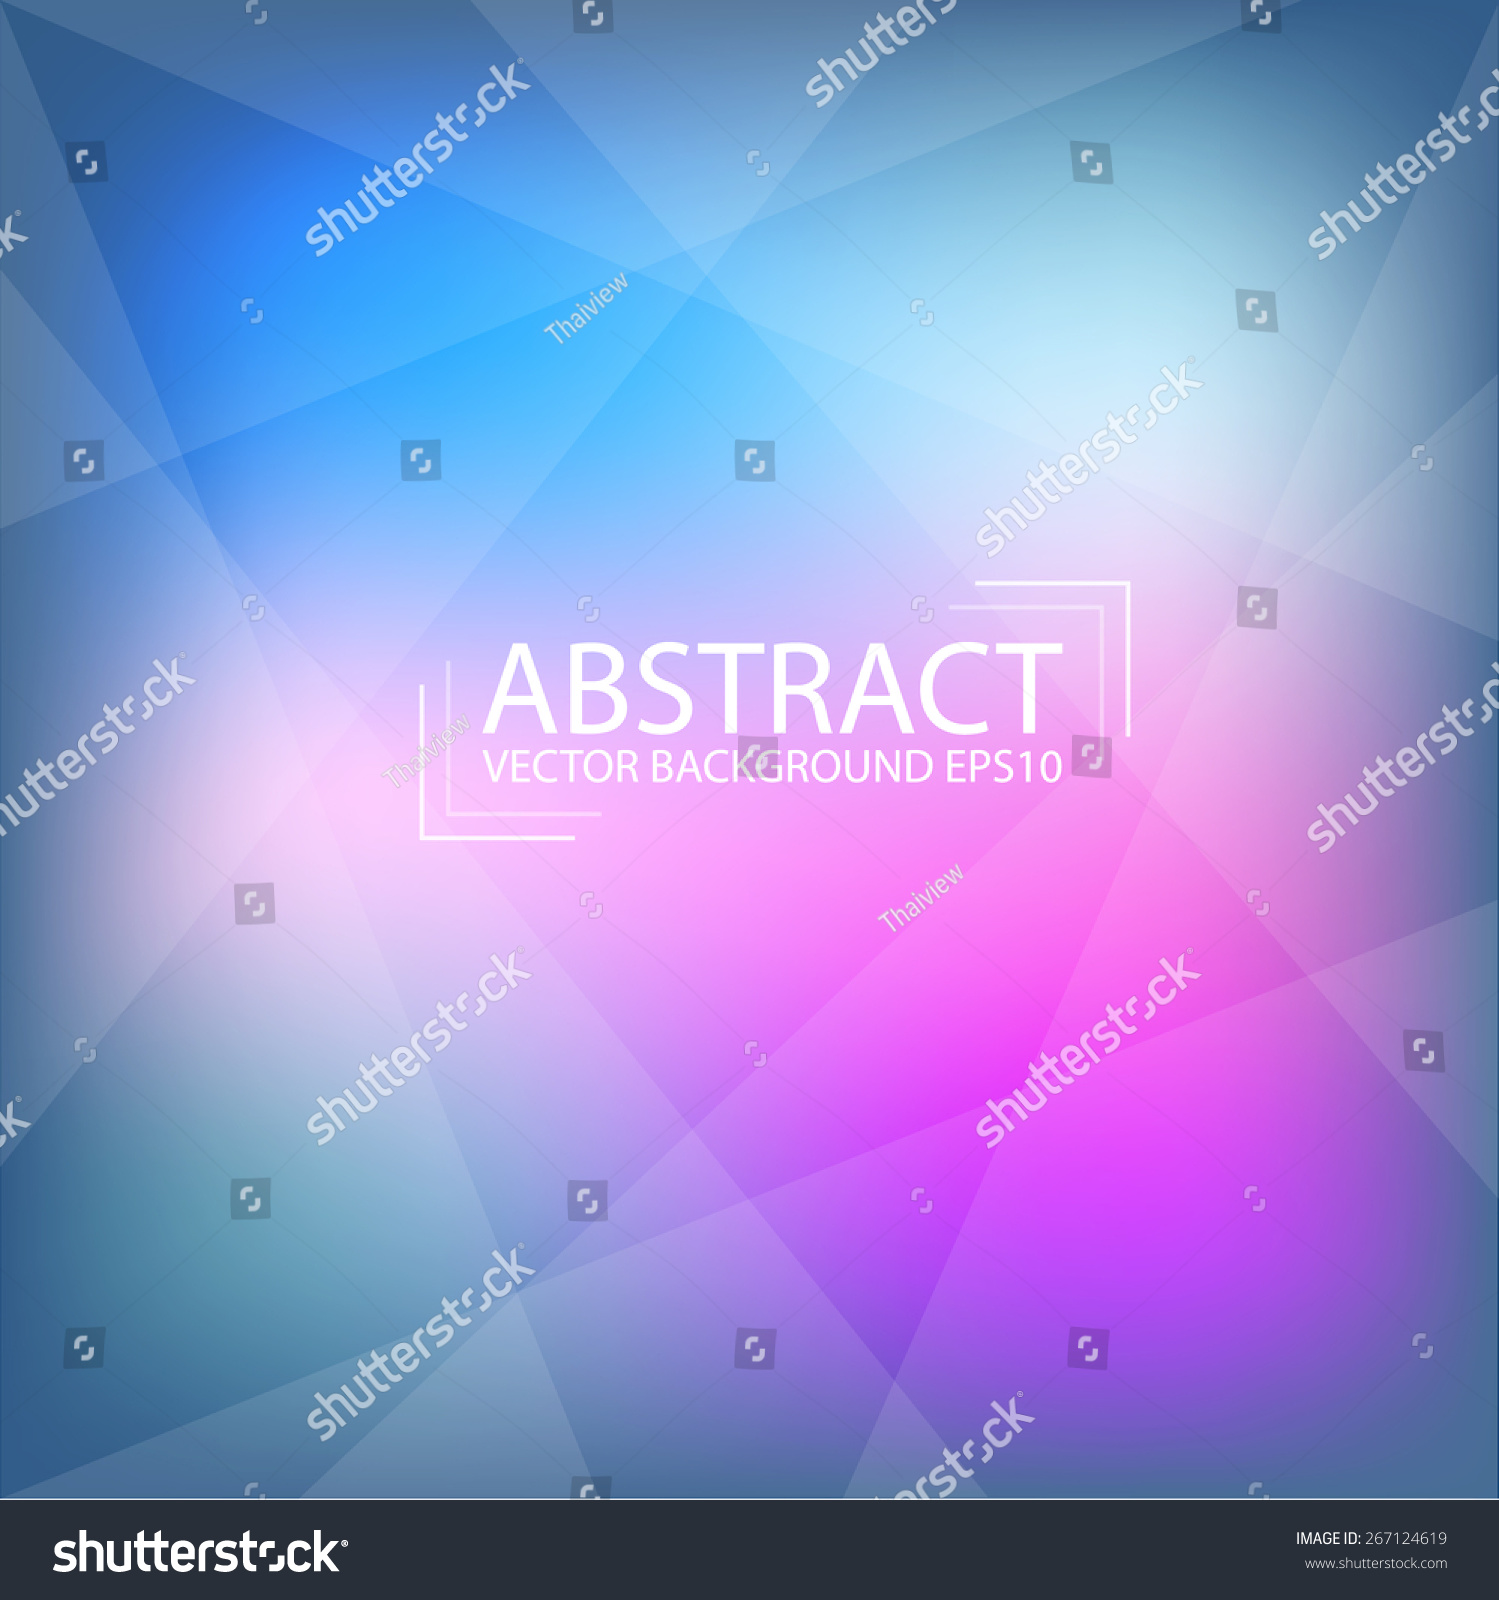 Blue And Pink Purple Abstract Vector Background And Square ...